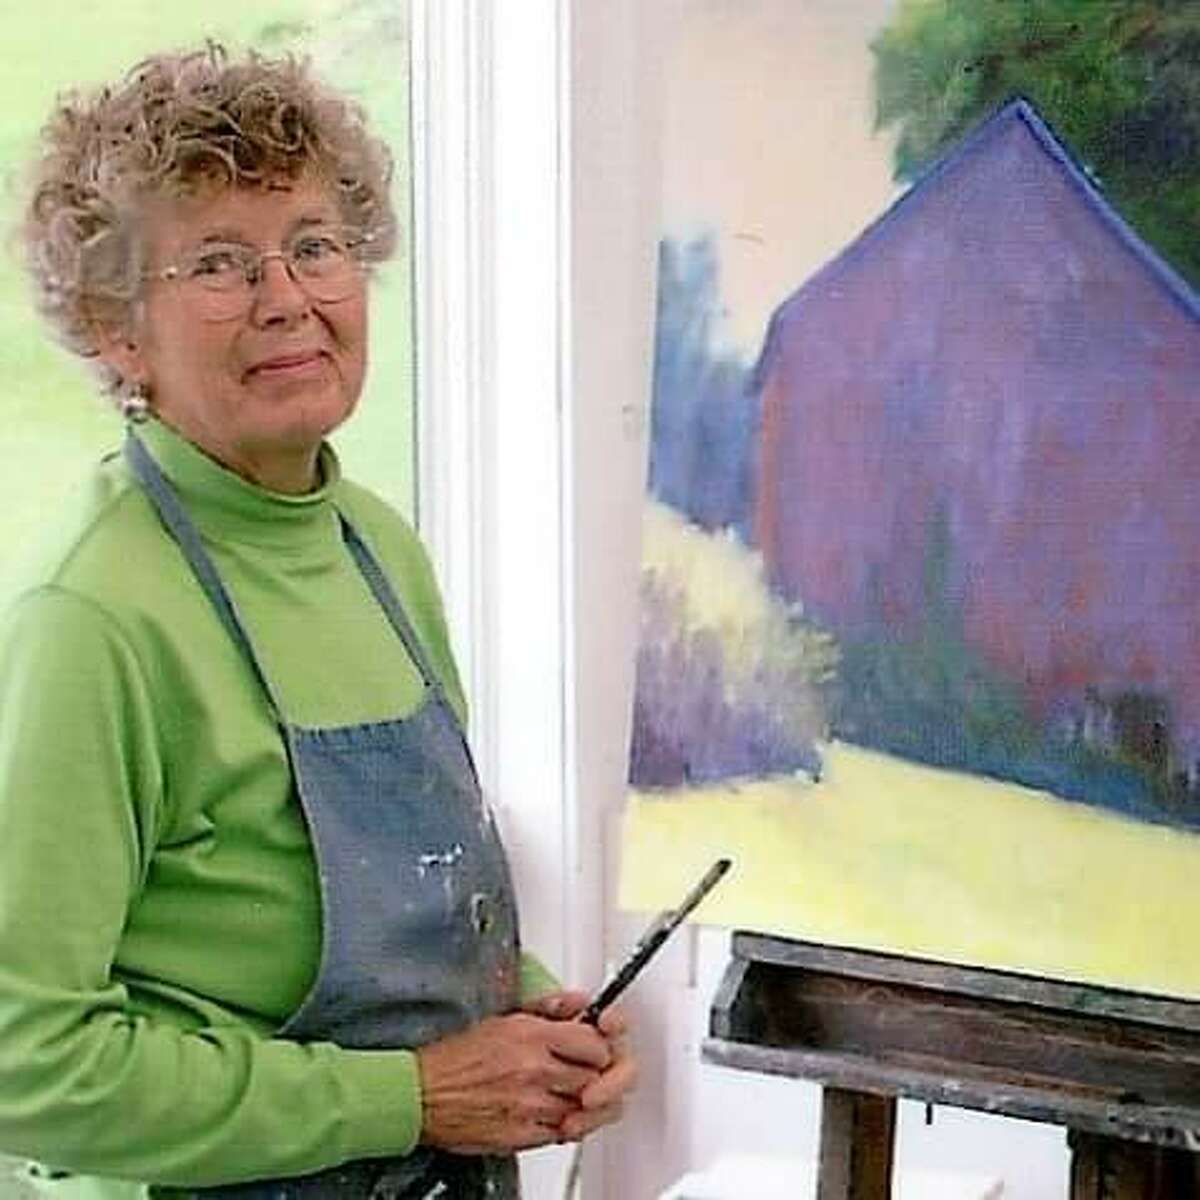 Virginia “Jini” McNeice, a well-known landscape artist in the Capital Region, is photographed beside one of her paintings. Her family is holding a sale of her artwork, with over 200 pieces in her collection, following her passing in 2019.